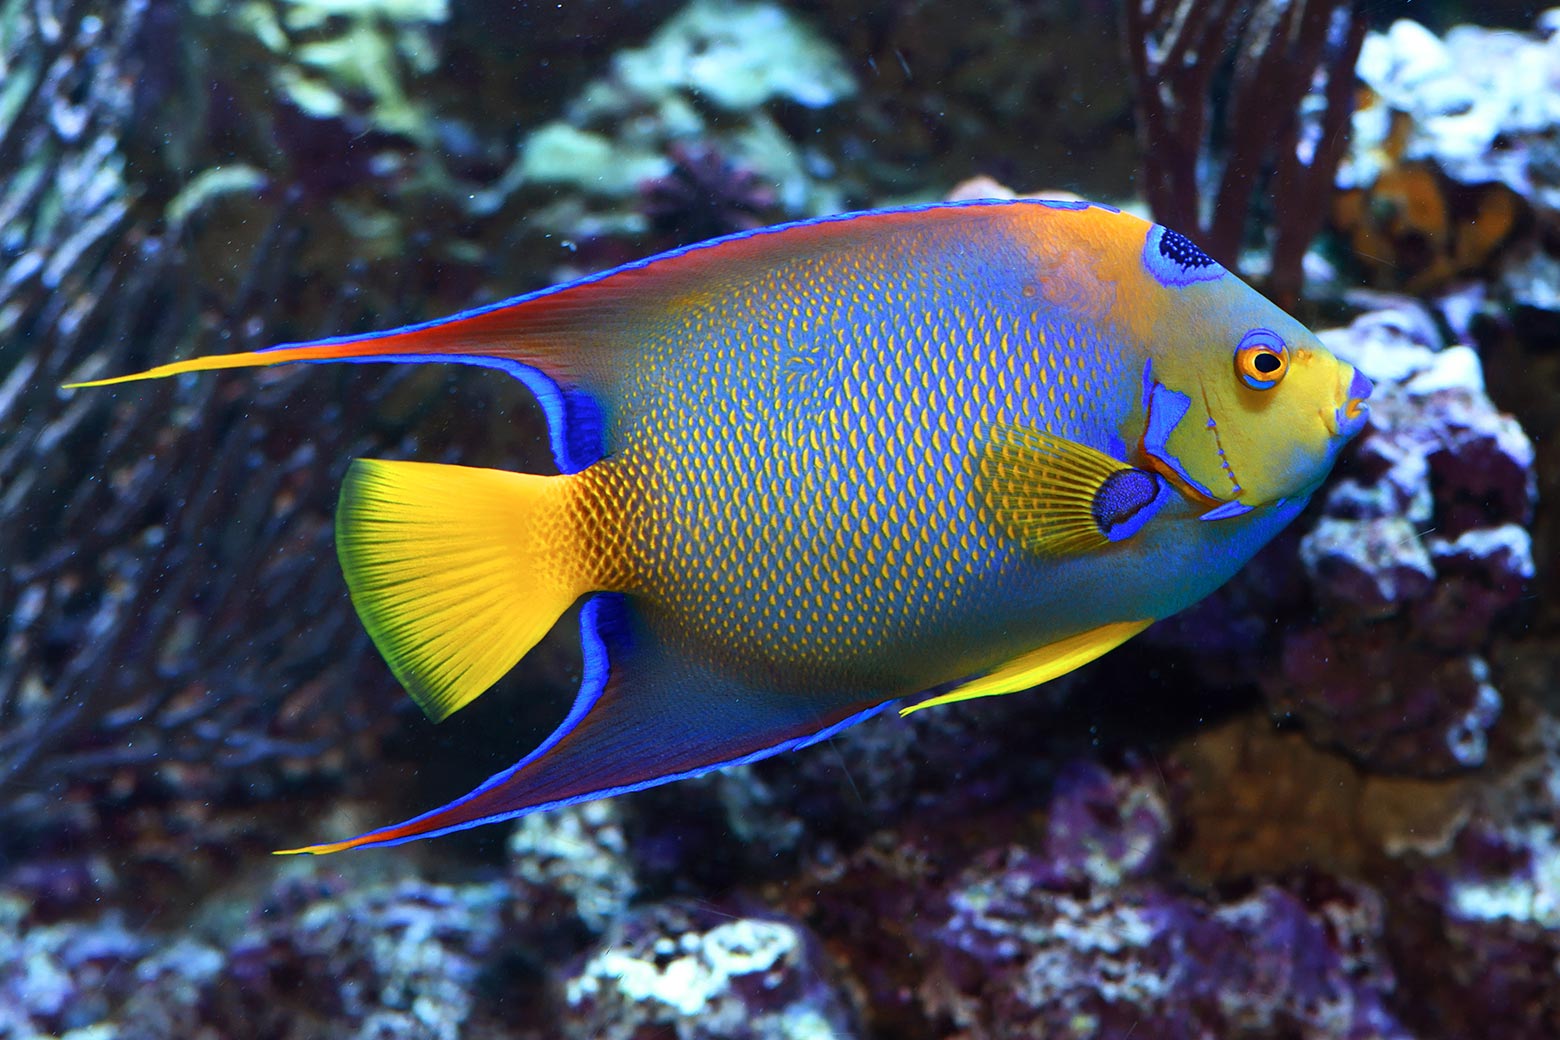 A queen angelfish, which is a bright yellow-and-blue Atlantic fish.